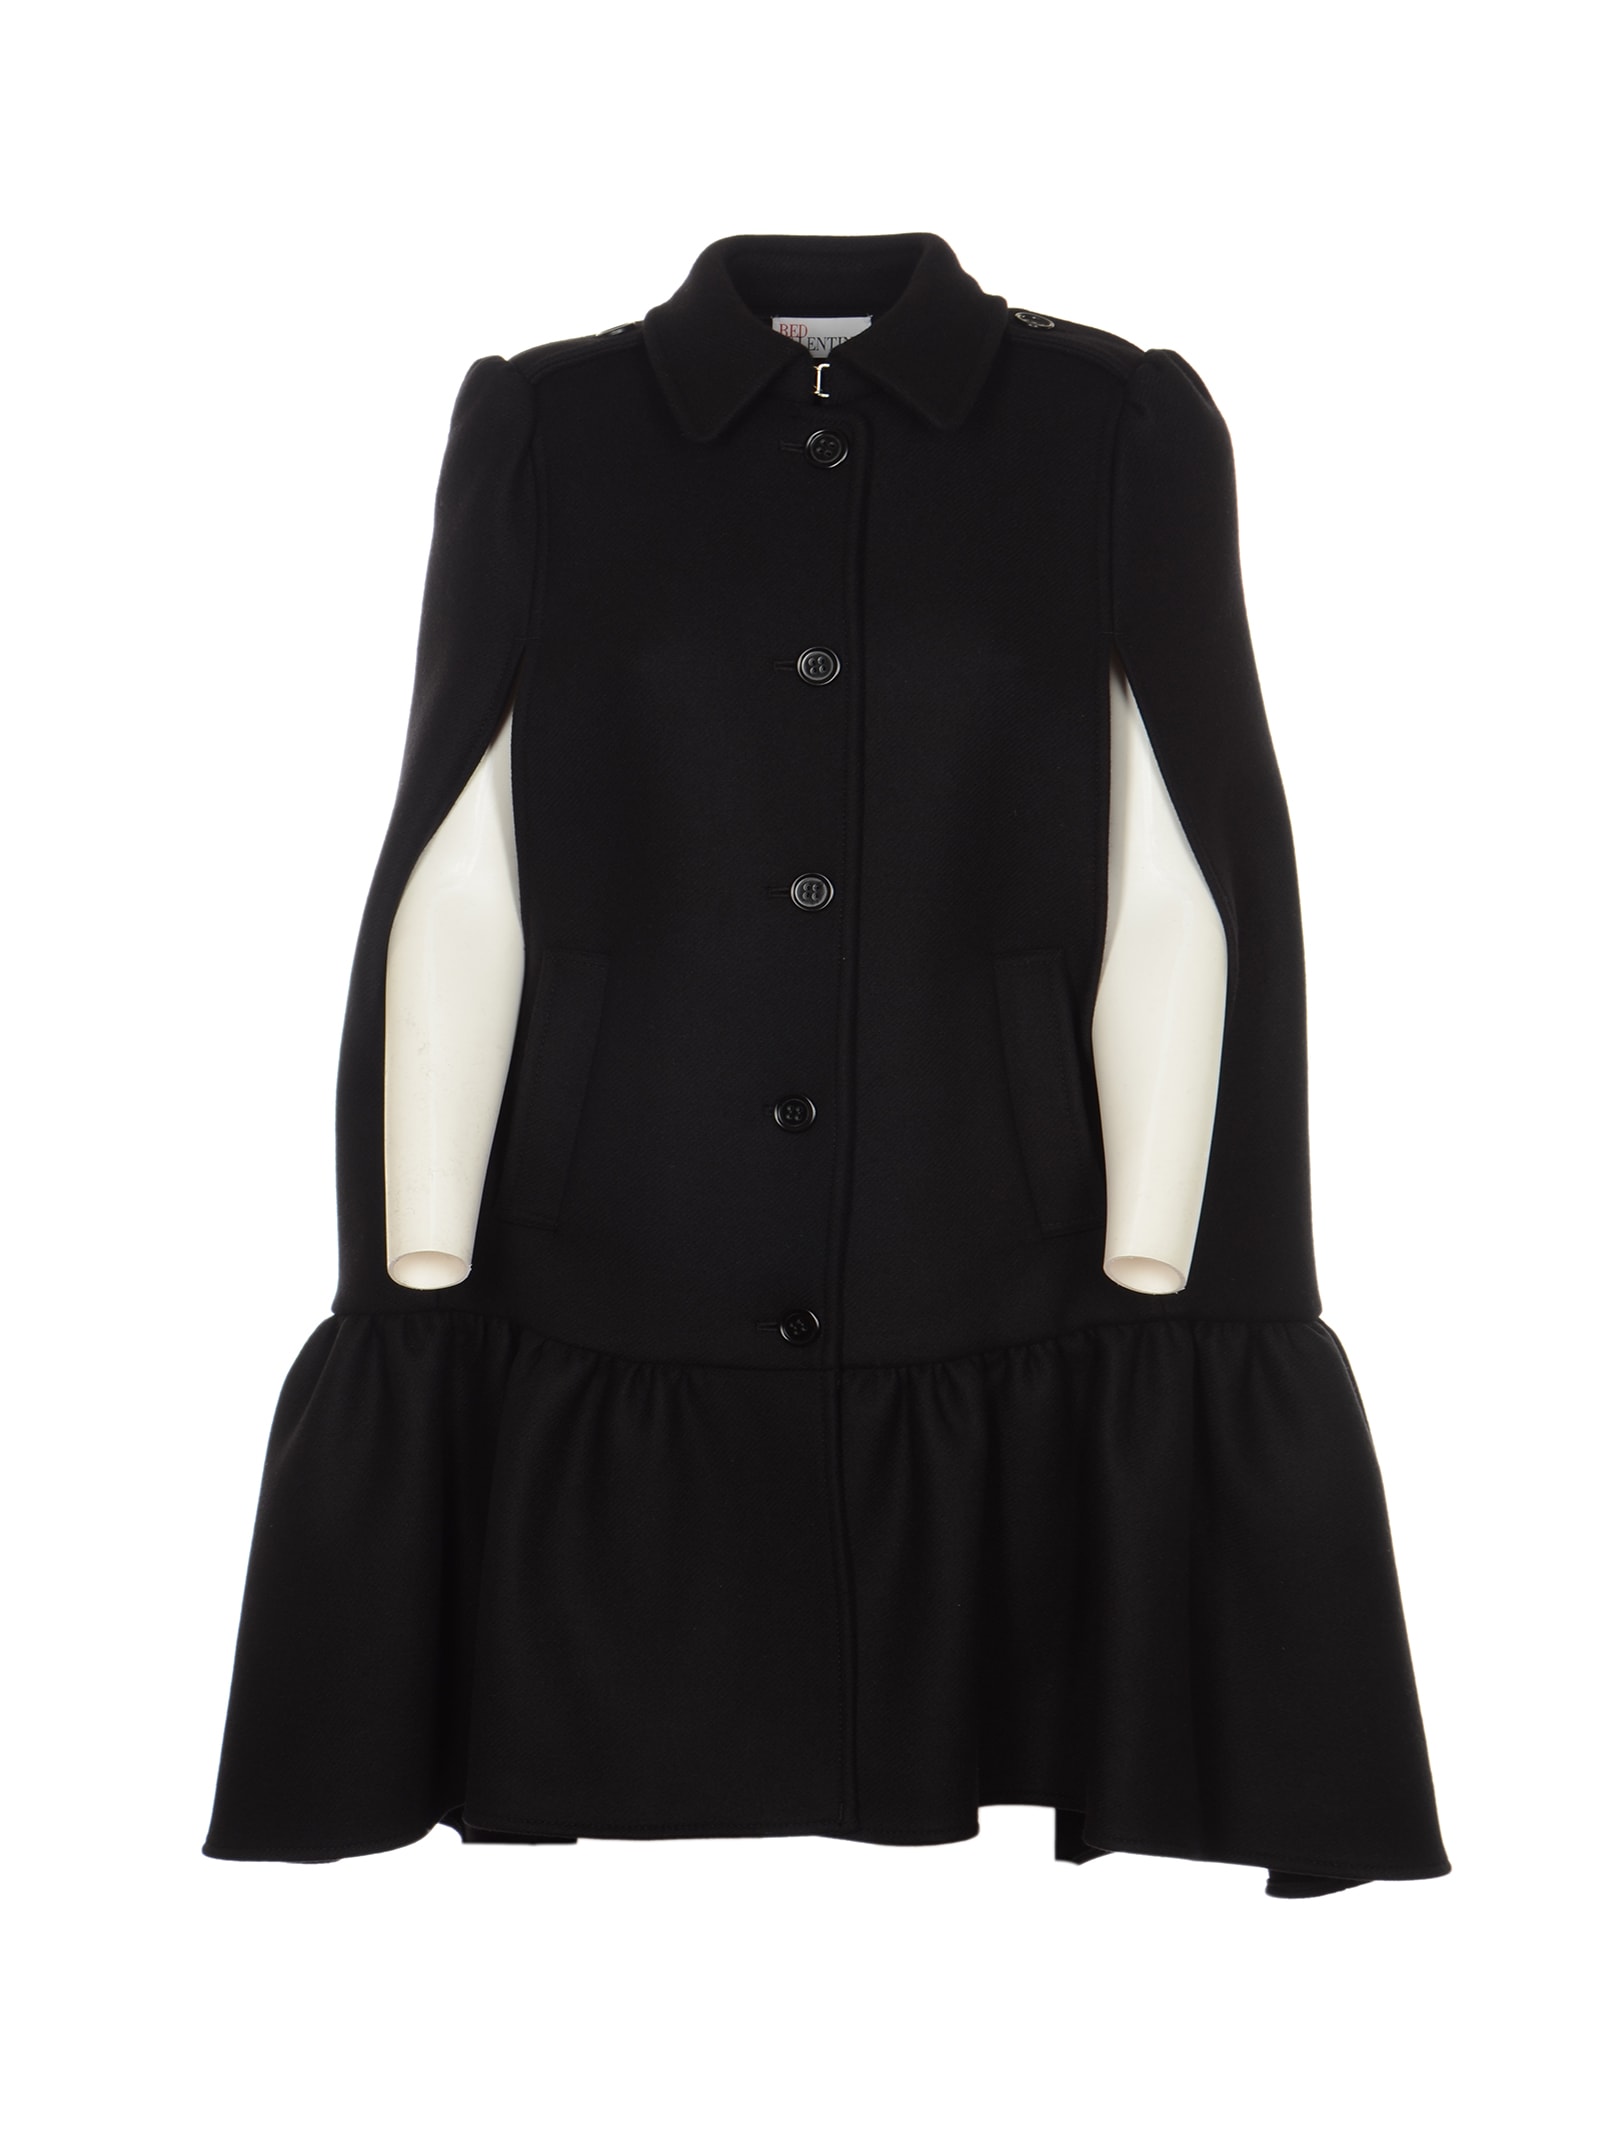 RED Valentino Cut-out Sleeved Coat